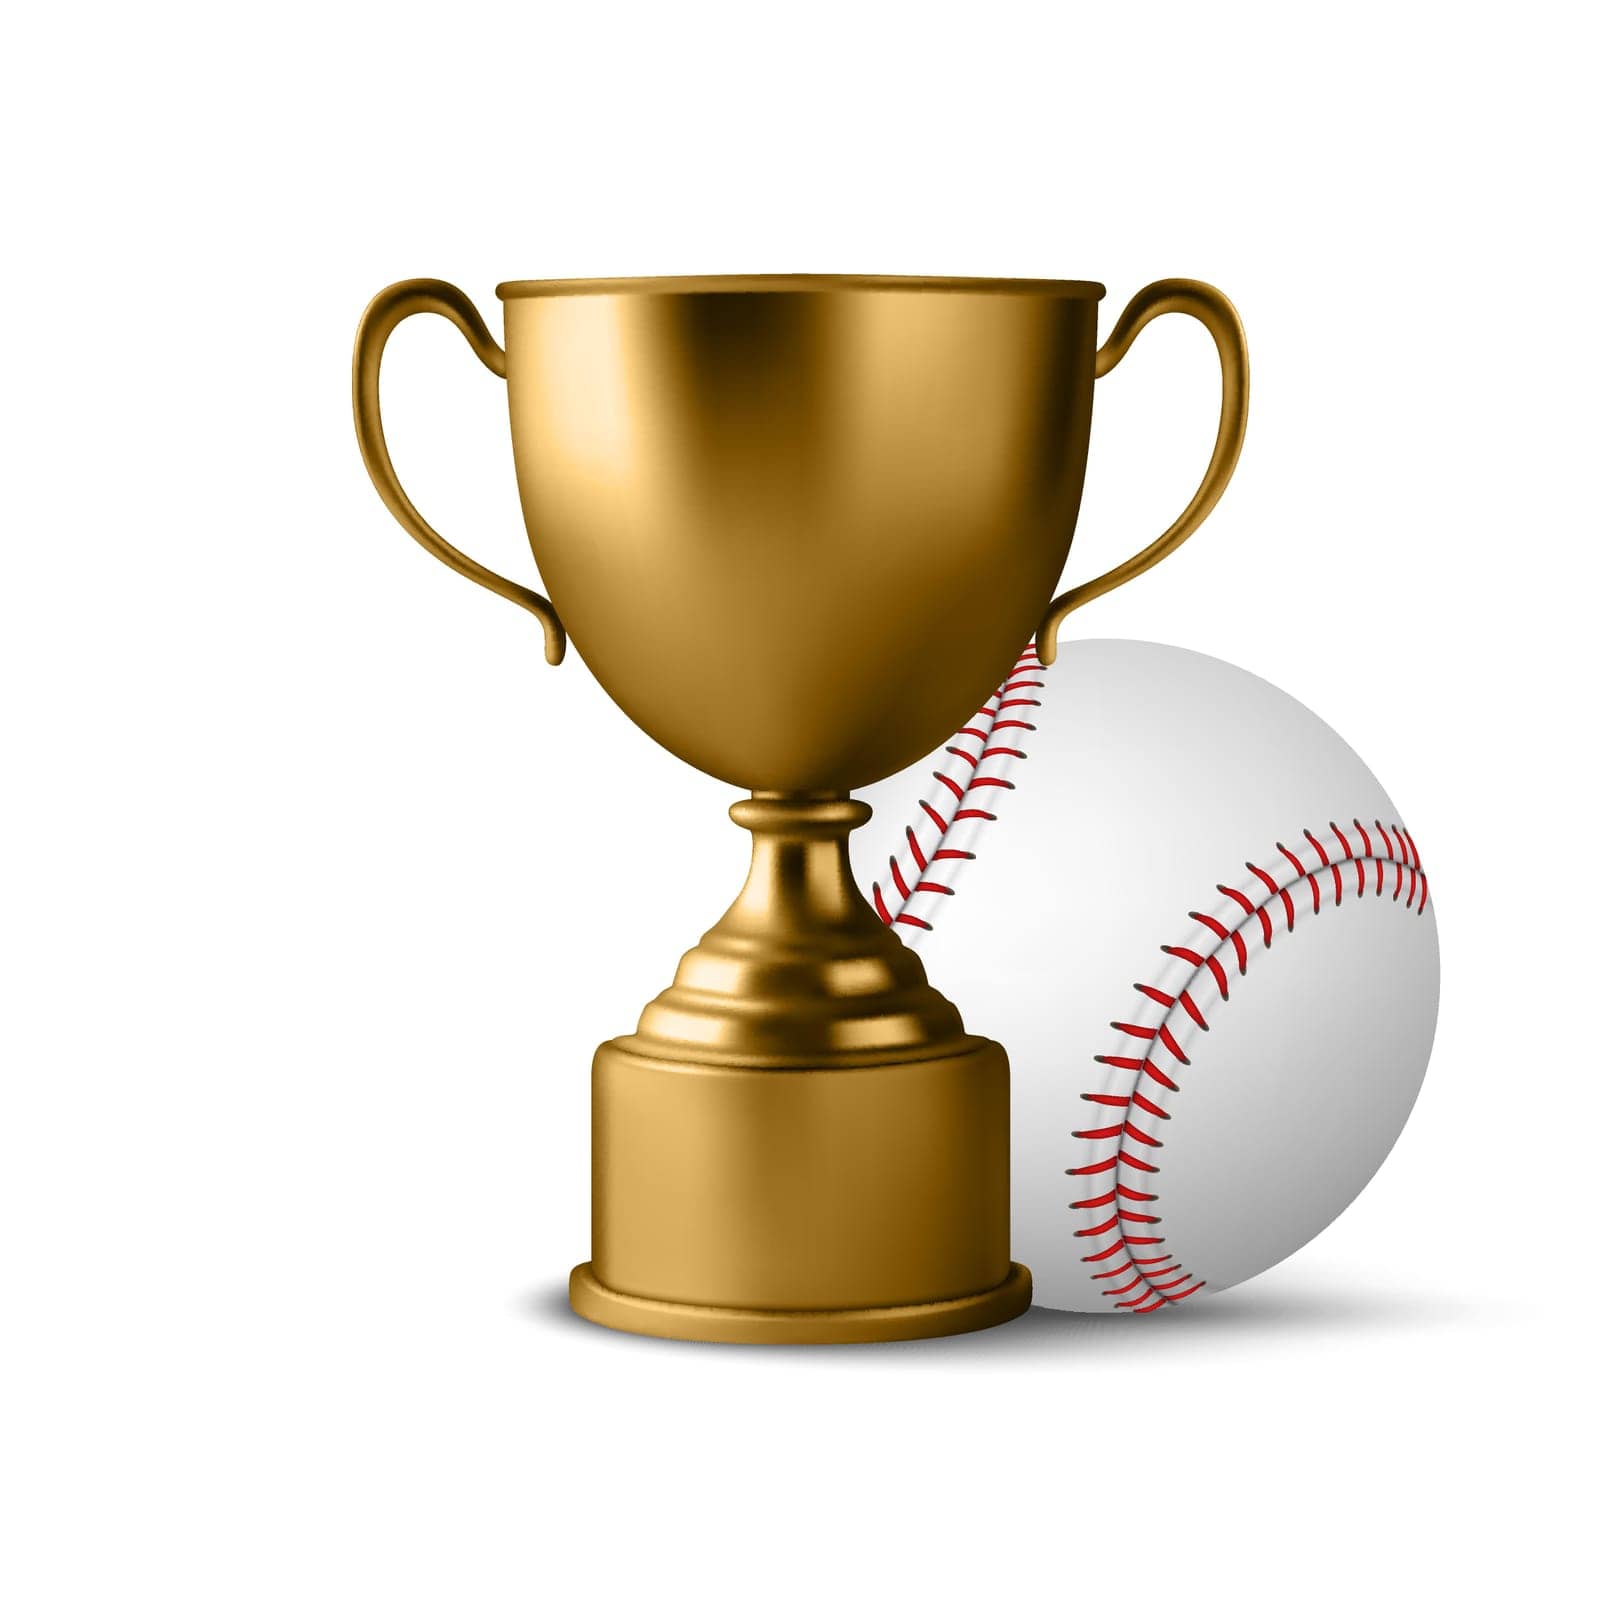 Vector 3d Realistic Metal Yellow Golden Champion Cup and Baseball Set, Isolated. Championship Trophy Design Template for Sports Concept, Front View.